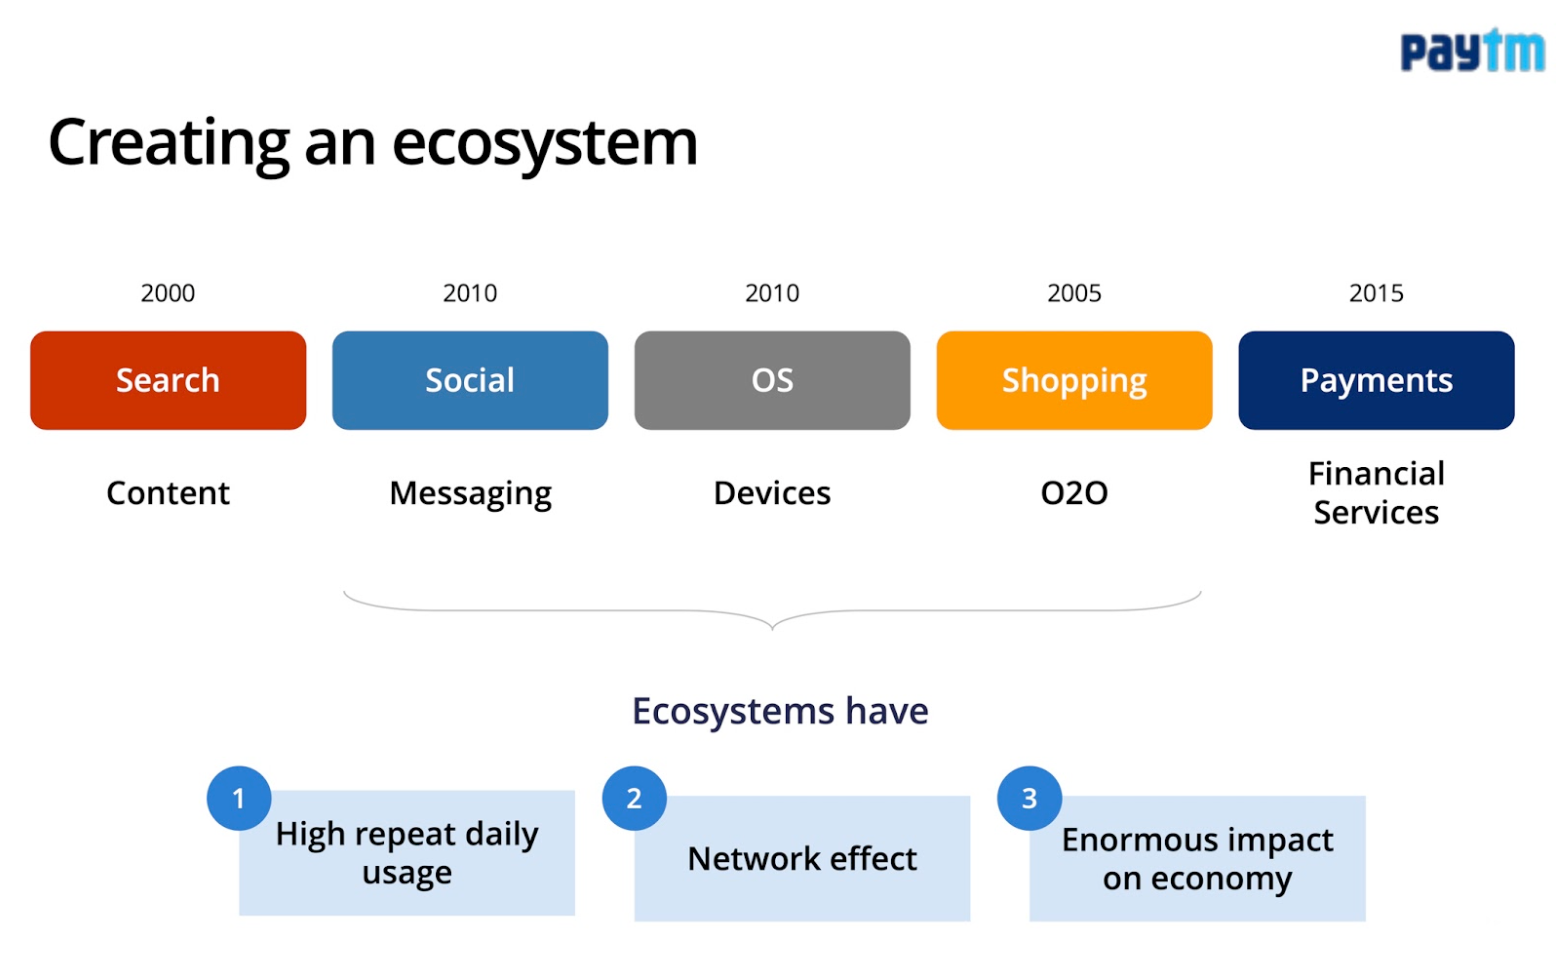 Slide from Paytm pitch deck talking about the ecosystem vision